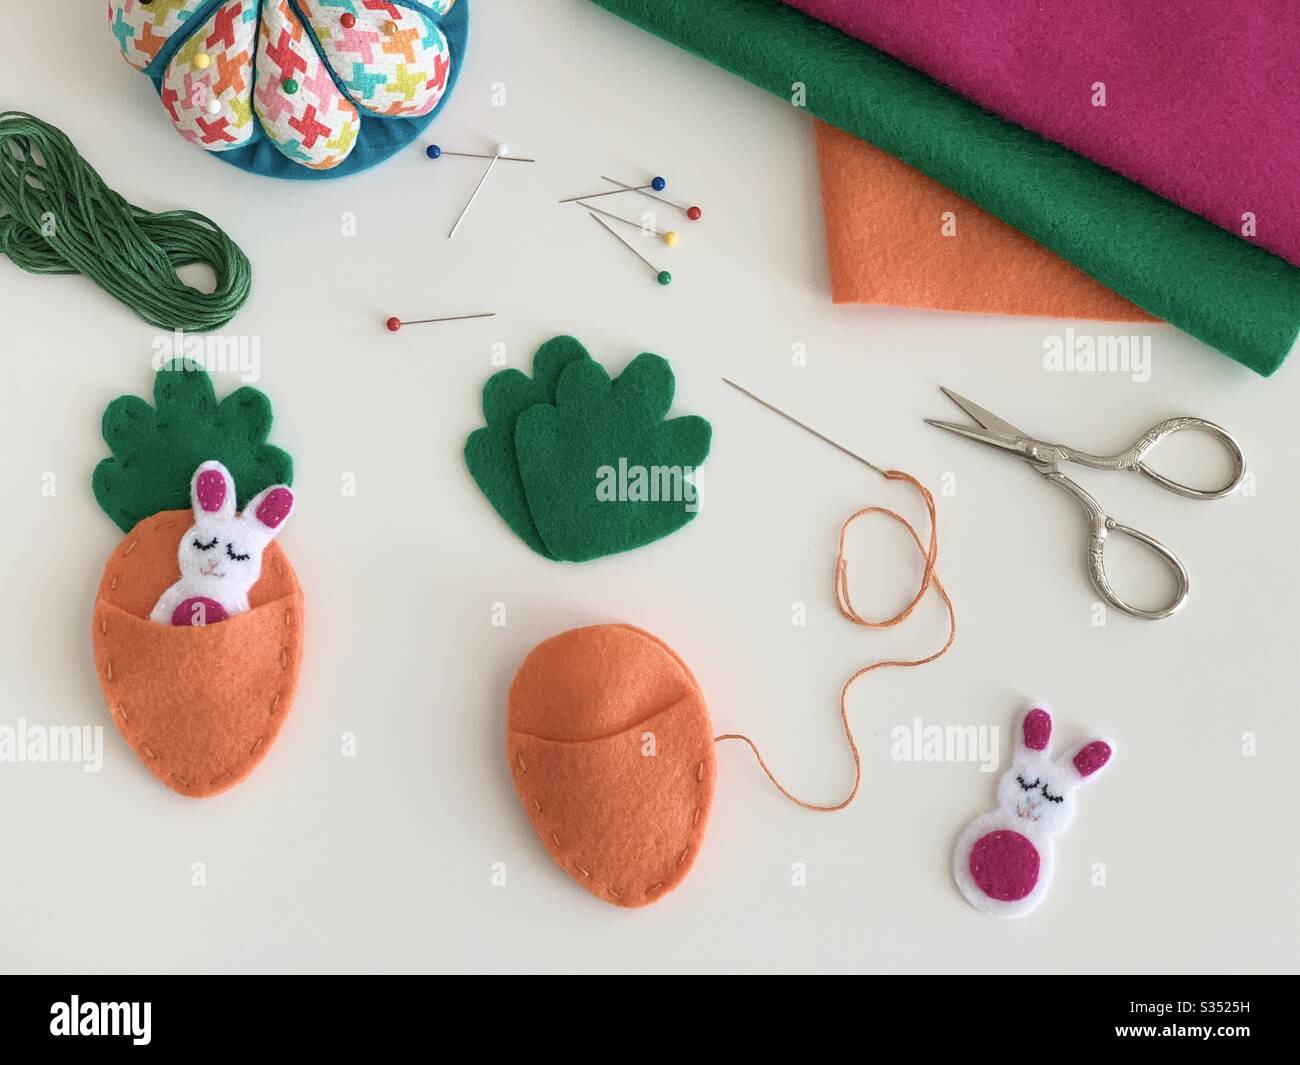 Easter crafting with felt bunny & carrot Stock Photo